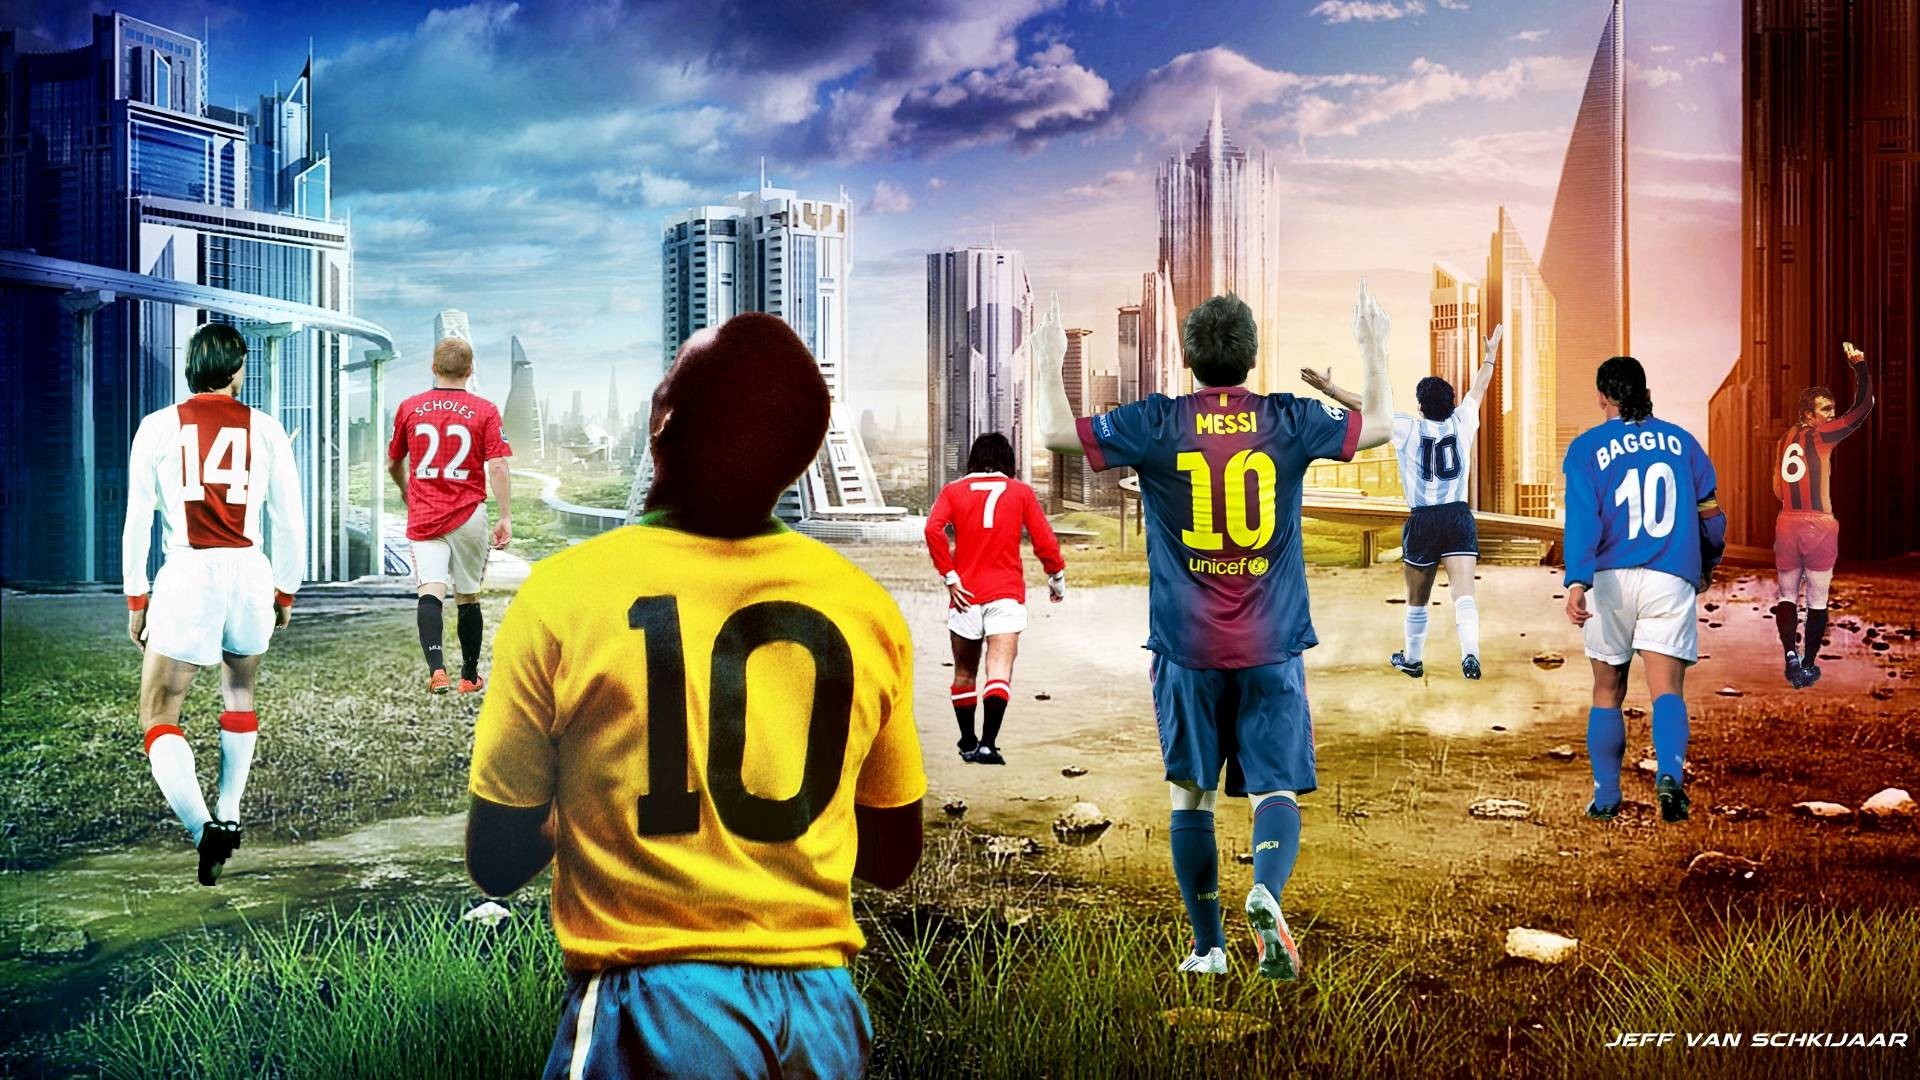 Best football players of all time wallpaper by jeffery on deviantart